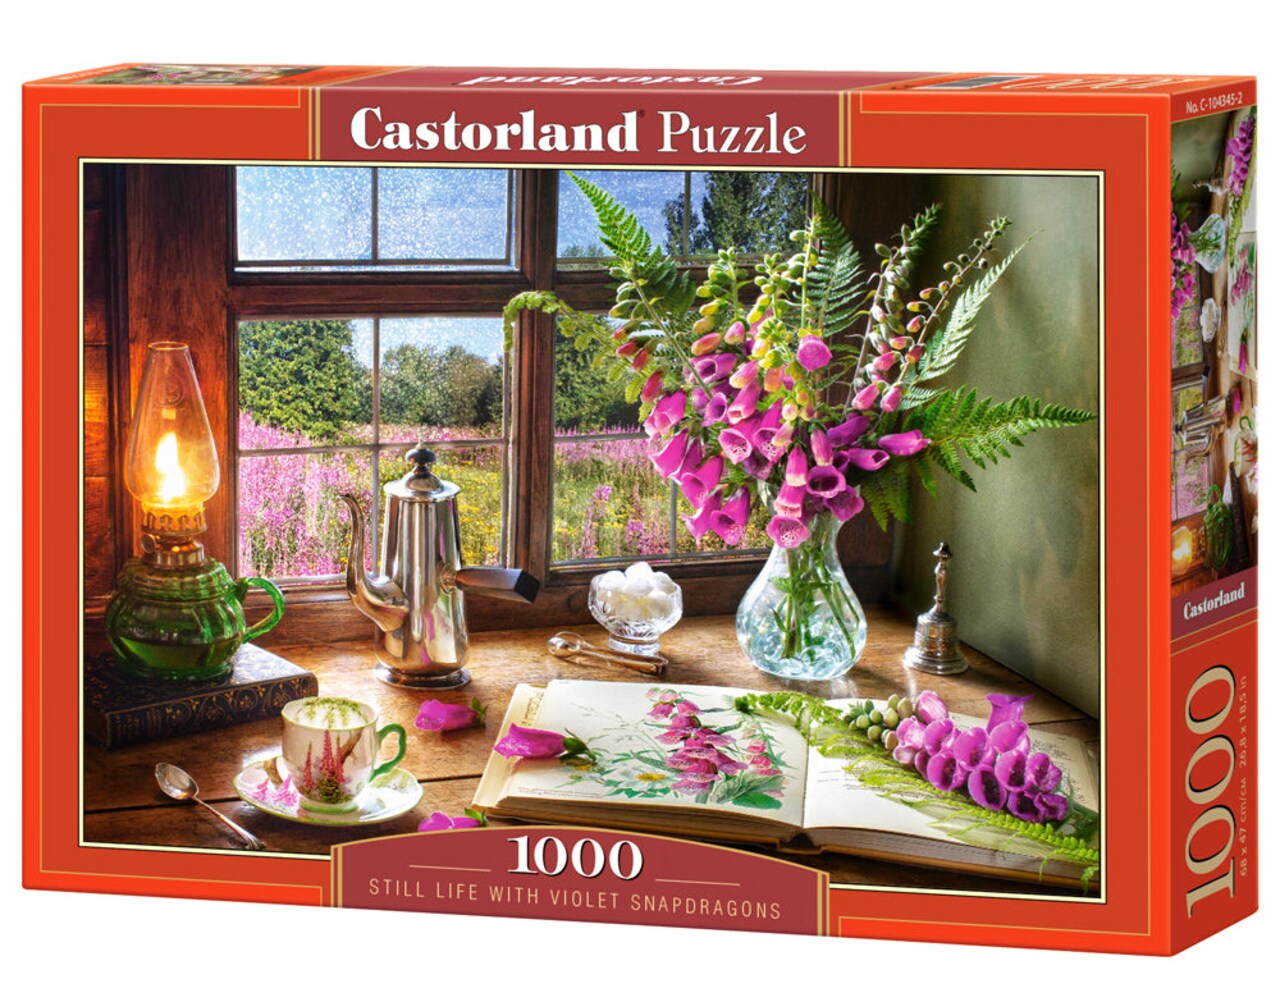 1000 Piece Jigsaw Puzzle, Still Life with Violet Snapdragons, Classic interior, Window view, Garden puzzle, Adult Puzzle, Castorland C-104345-2